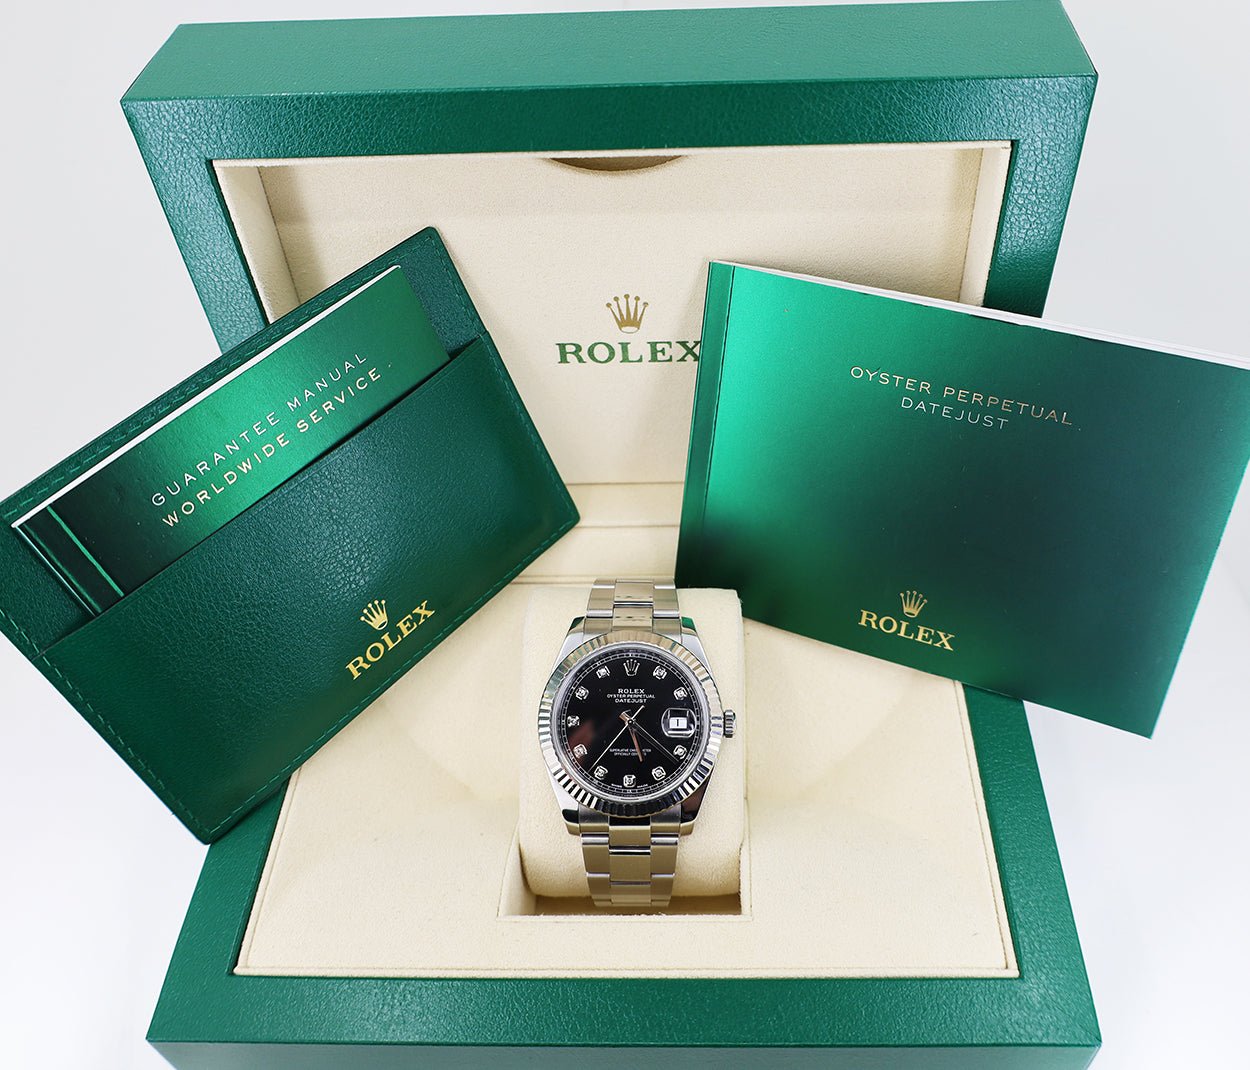 Rolex Datejust 41 for $17,542 for sale from a Private Seller on